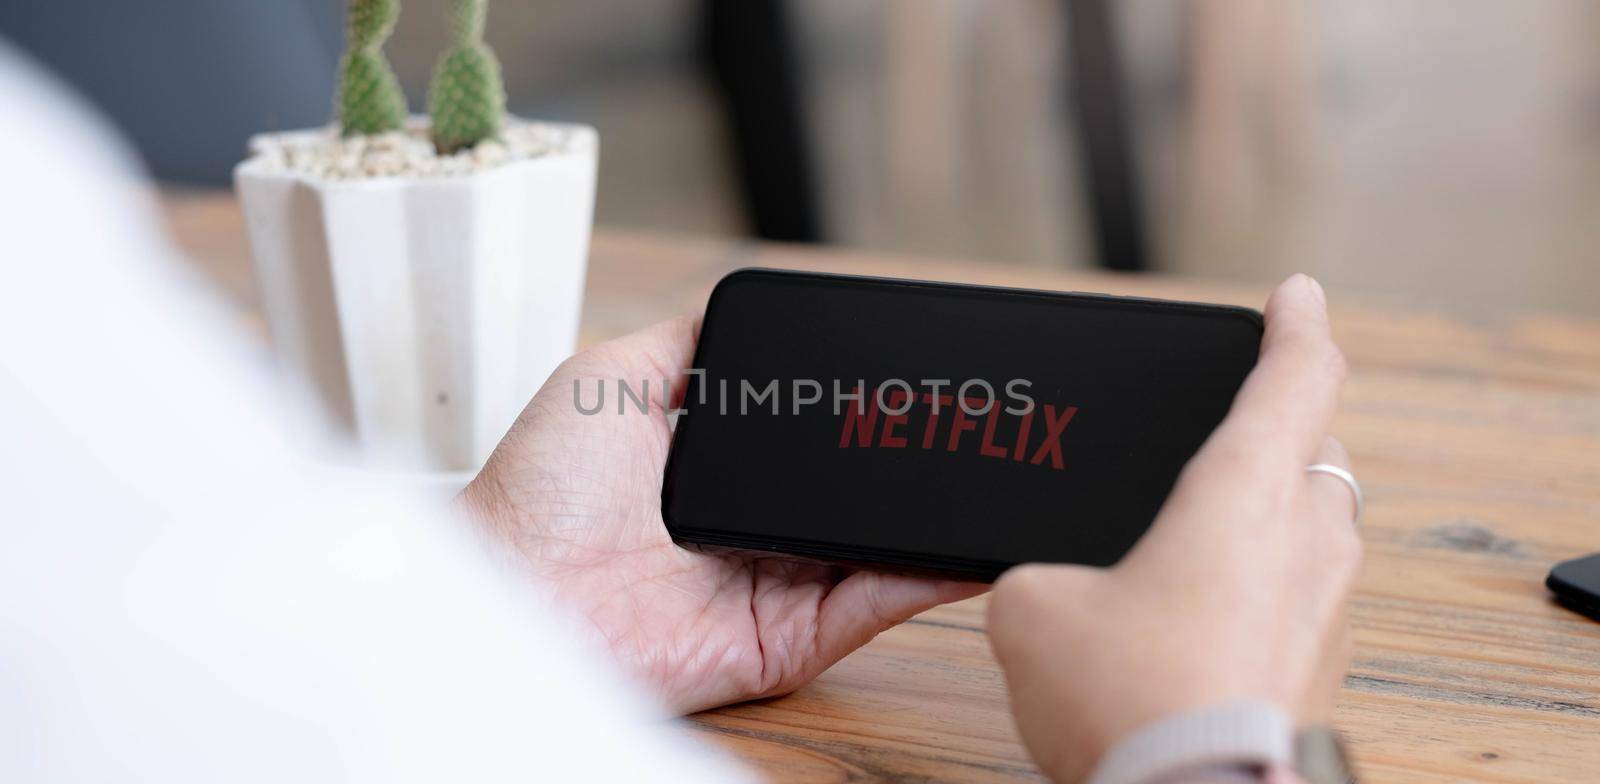 CHIANG MAI, THAILAND, AUG 2 2021 : Woman hand holding Smart Phone with Netflix logo on Apple iPhone Xs. Netflix is a global provider of streaming movies and TV series. by wichayada